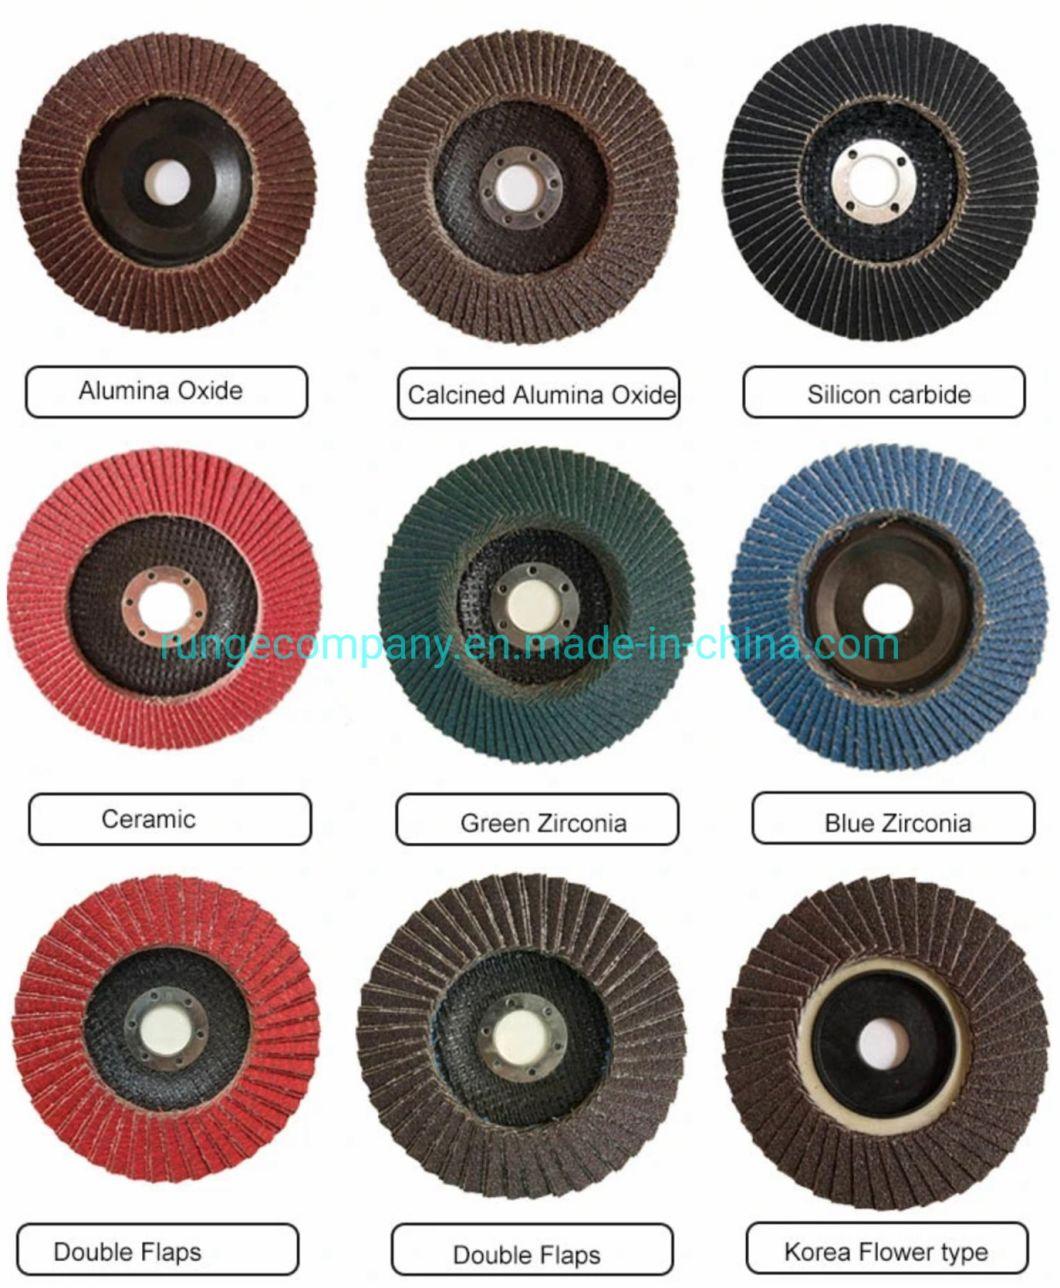 Power Electric Tools Accessories 105 X 1mm Ultra Thin Cutting Disc Wheel Black/Green/Red for Metal Stainless